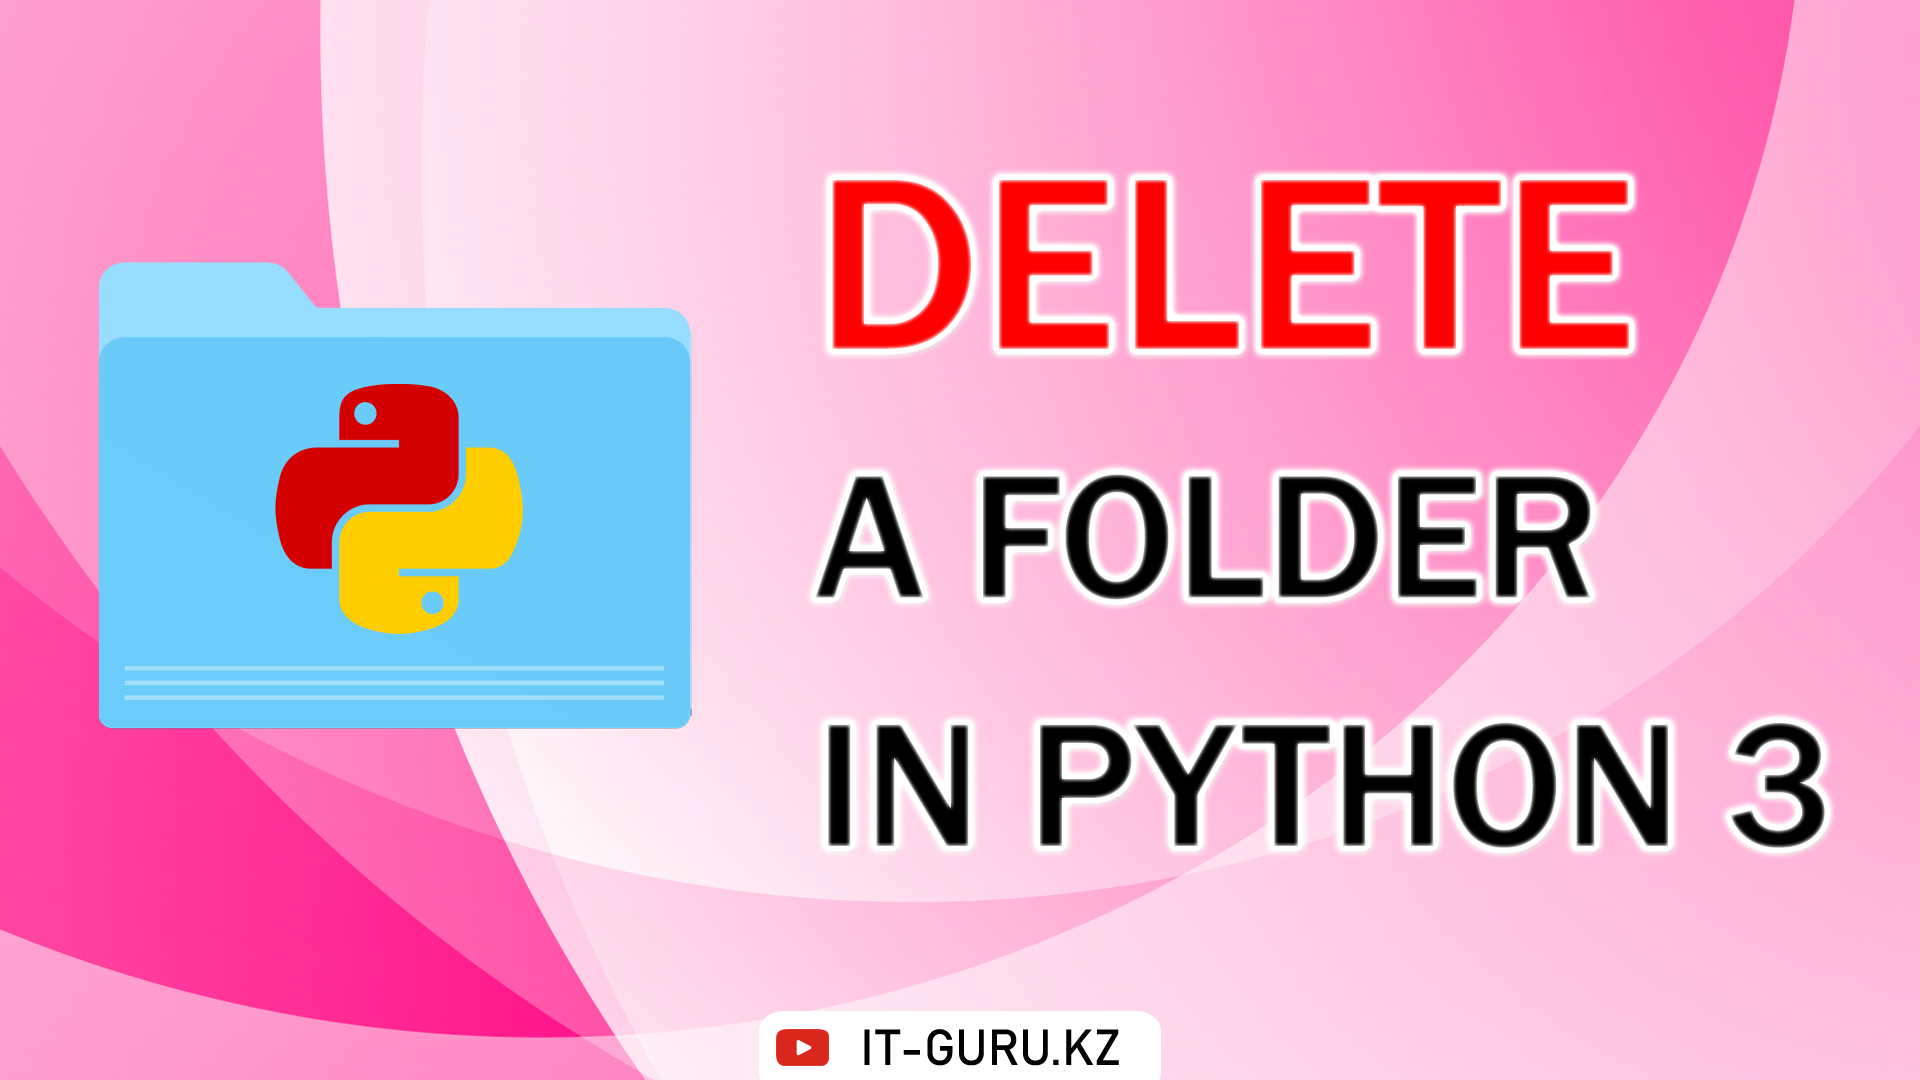 How to delete a folder in Python